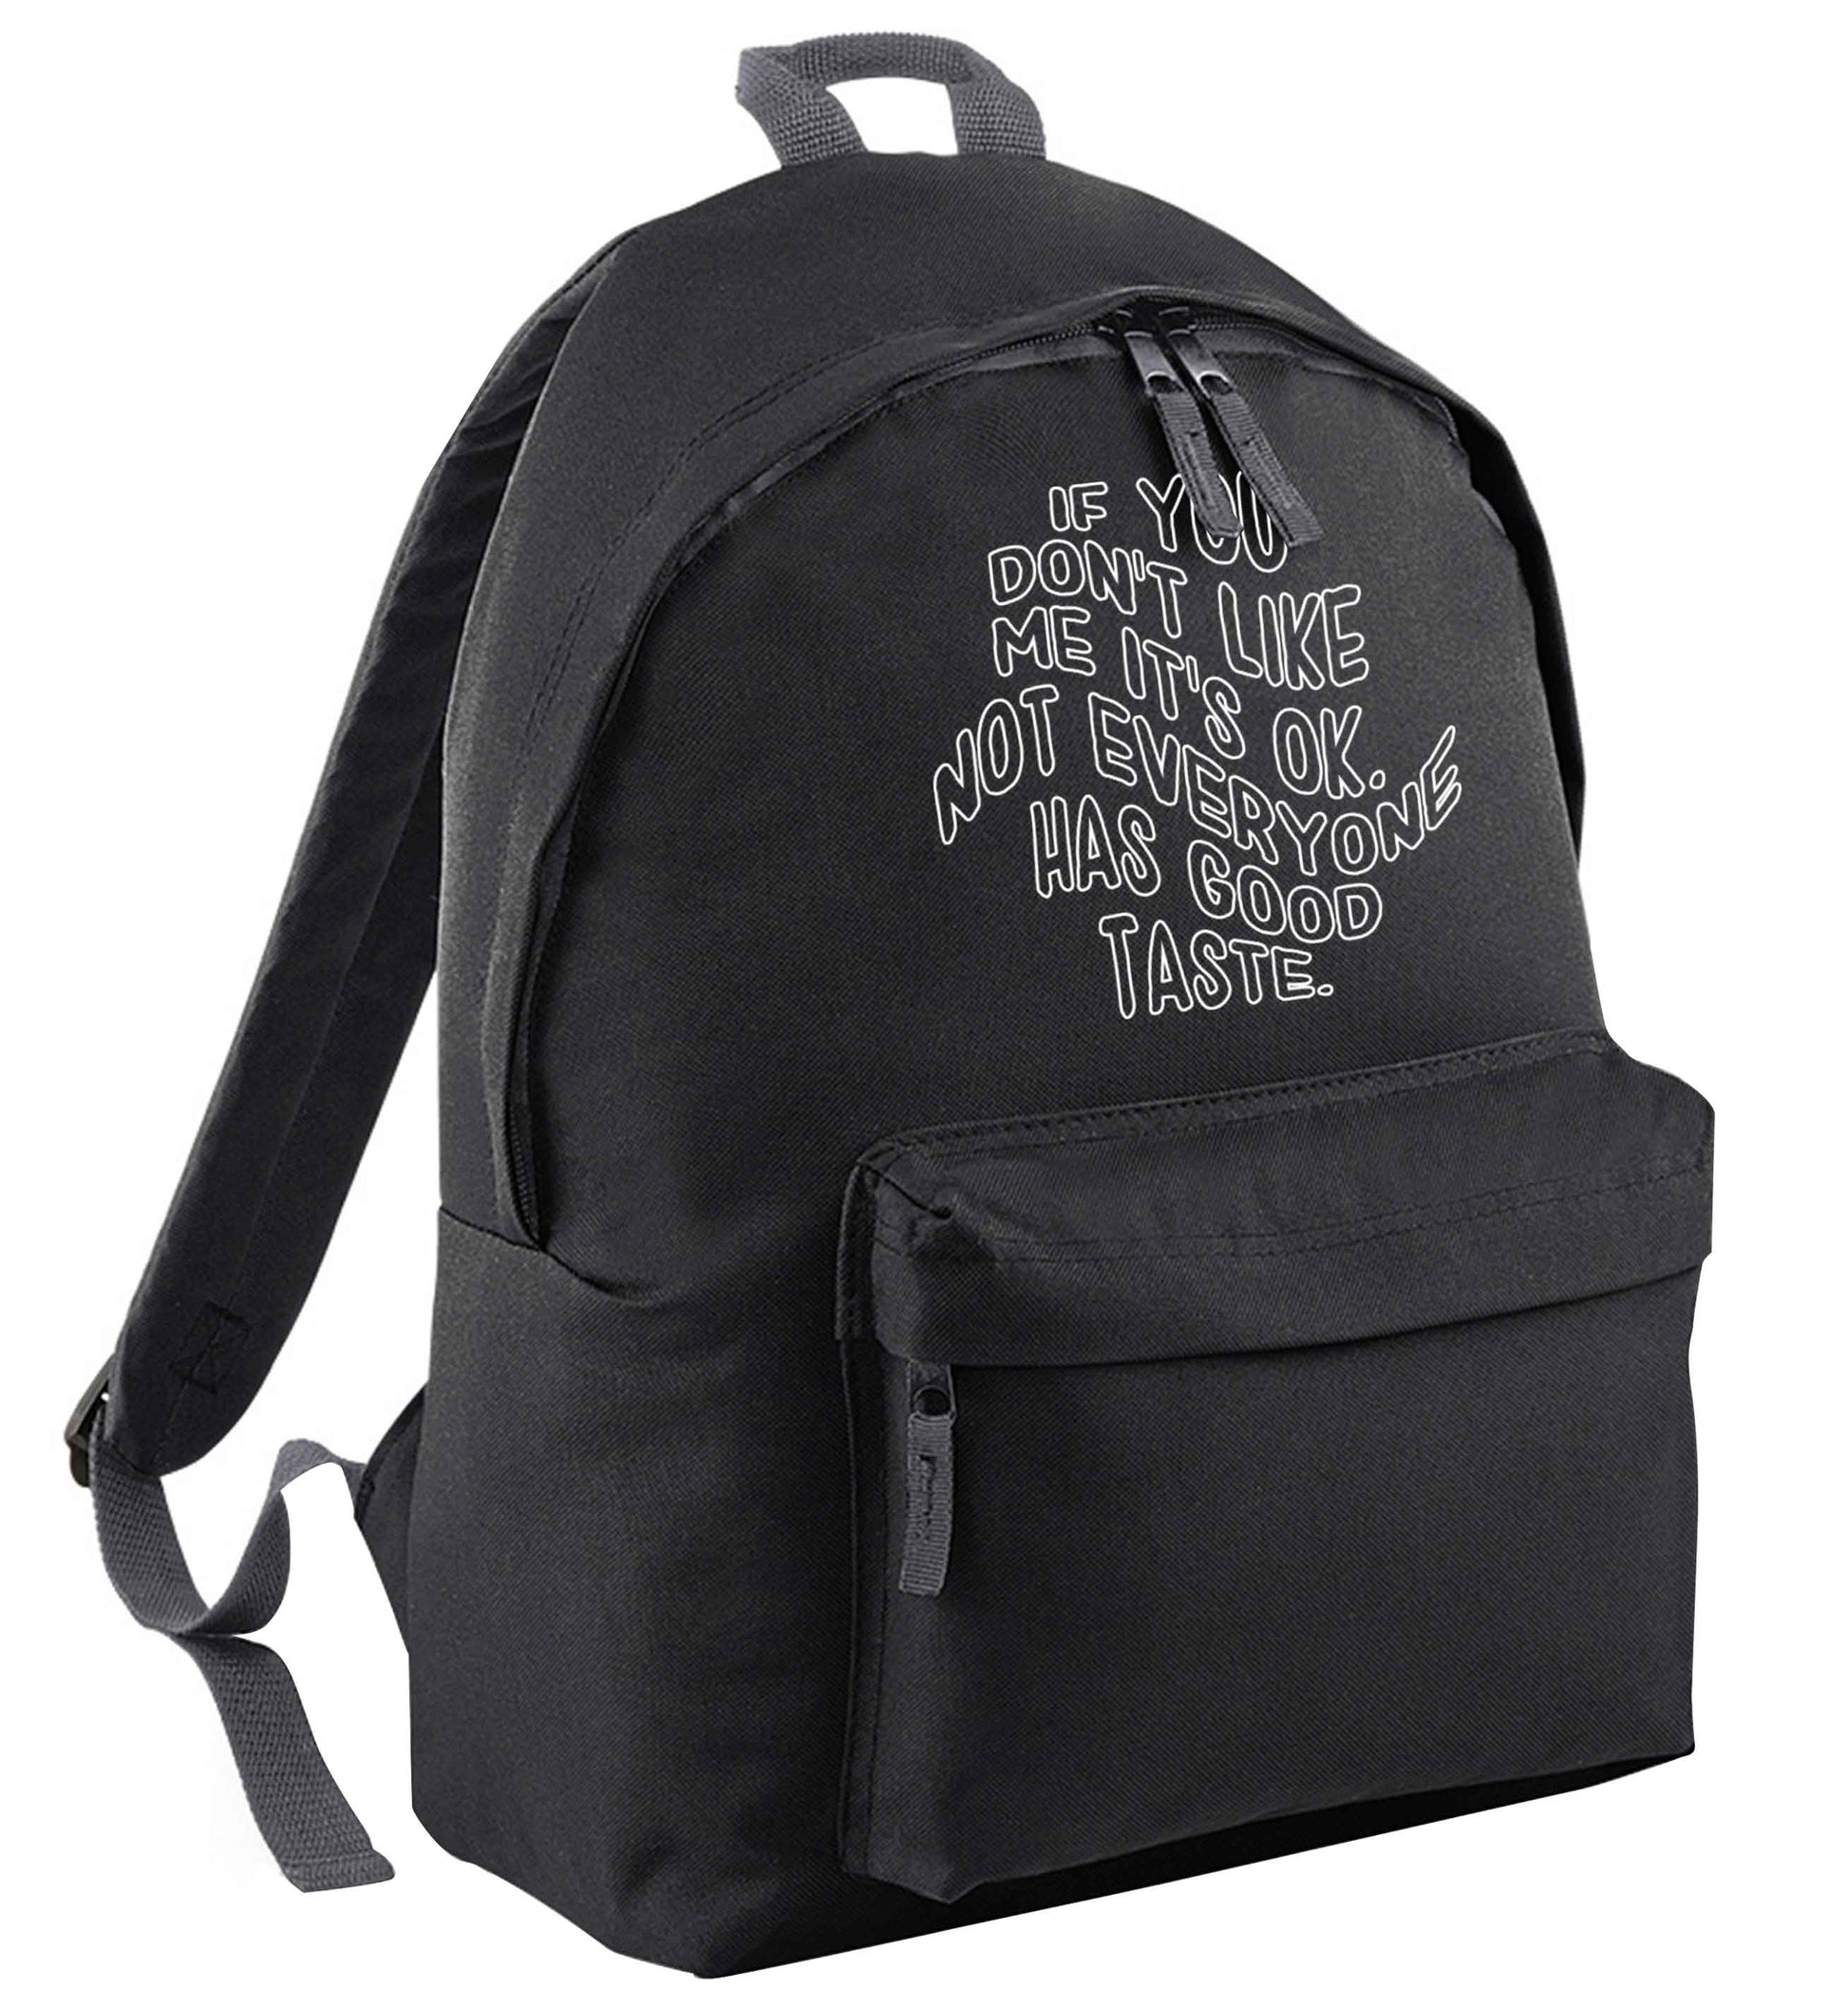 If you don't like me it's ok not everyone has good taste black adults backpack